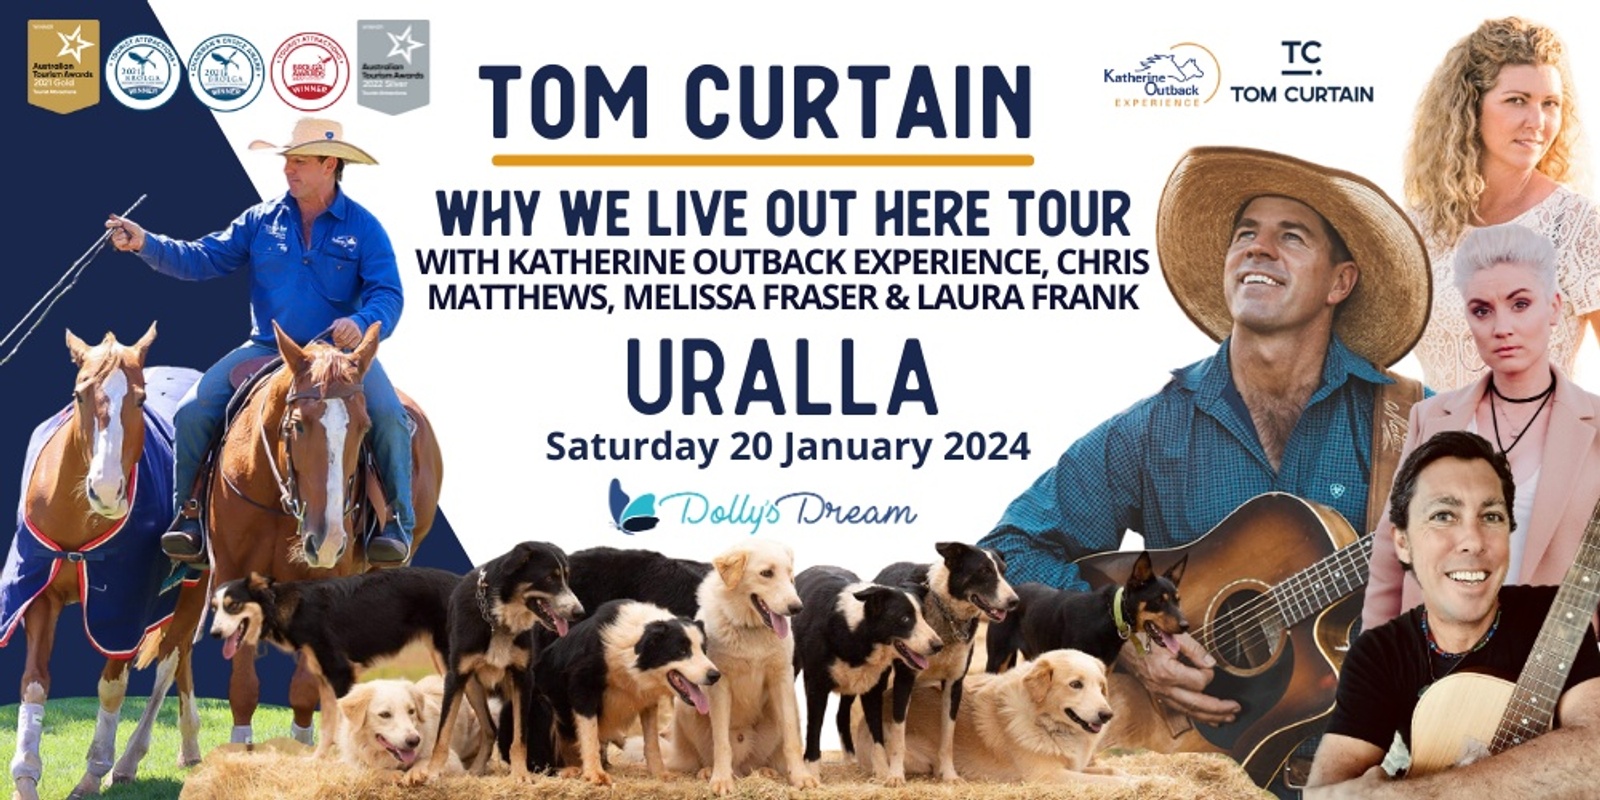 Banner image for Tom Curtain Tour - URALLA, NSW